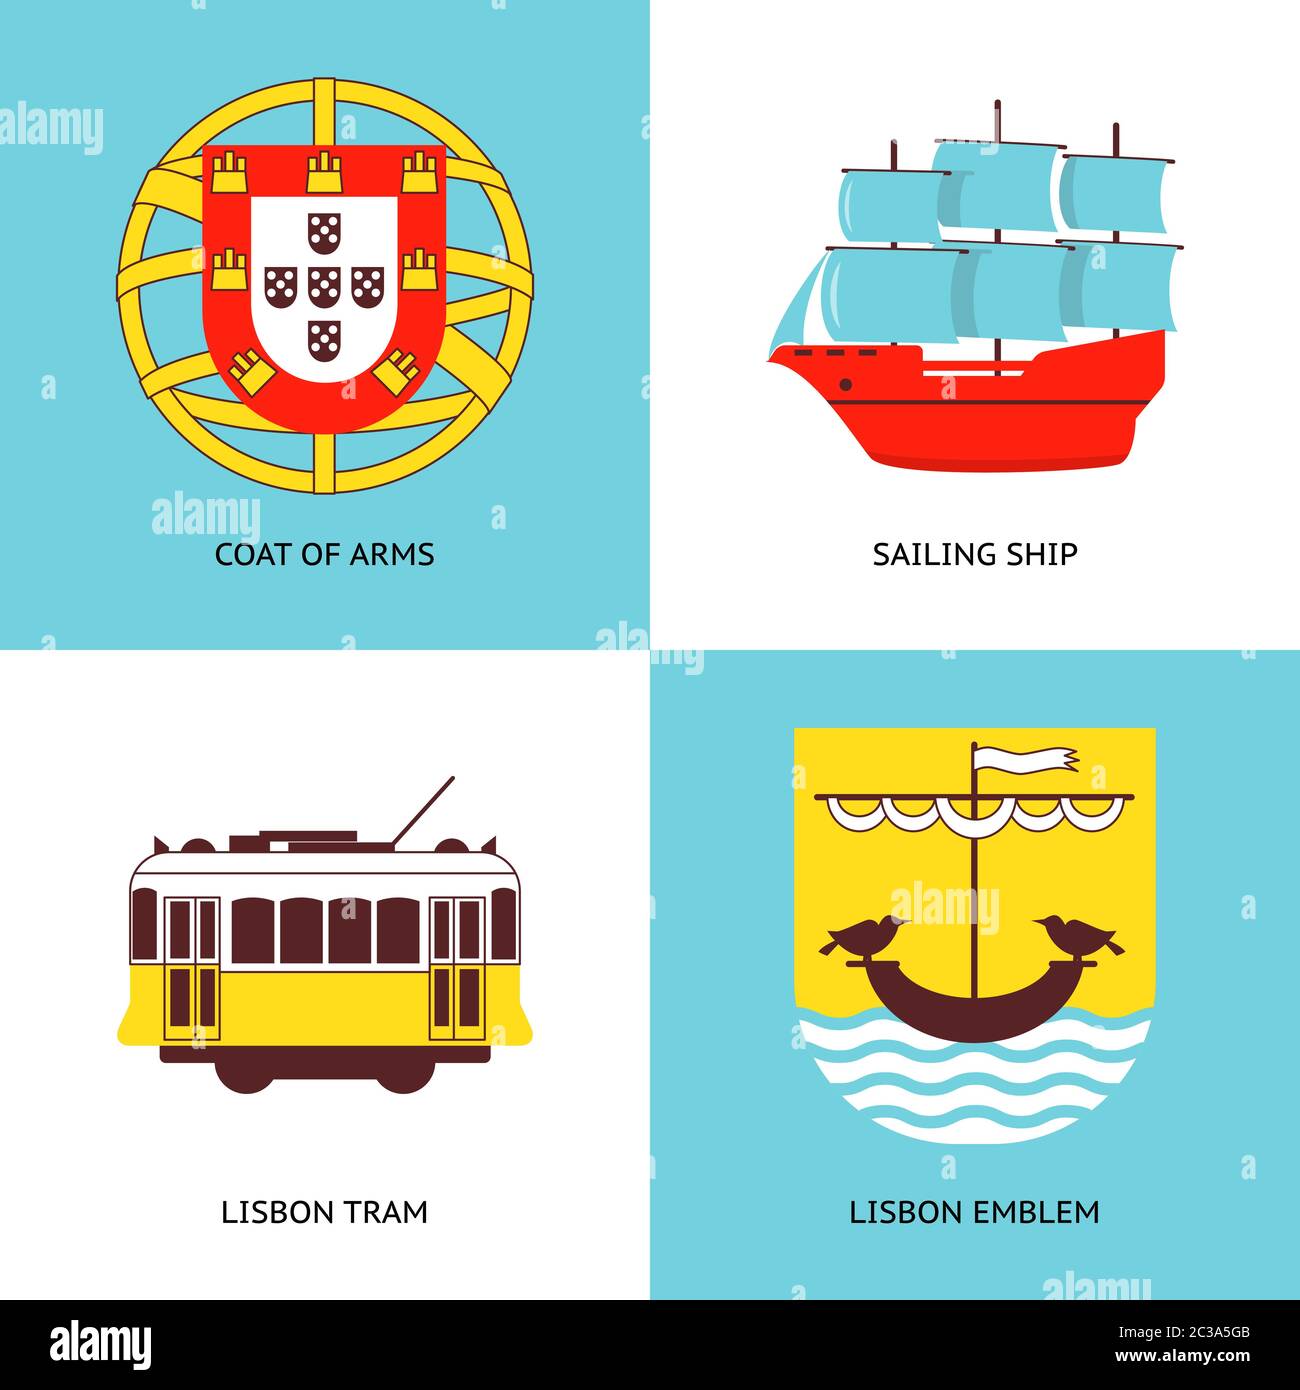 Collection of Portugal icons in flat style. Traditional symbols set including Portuguese coat of arms, sailing ship, Lisbon tram and Lisbon emblem. Stock Vector